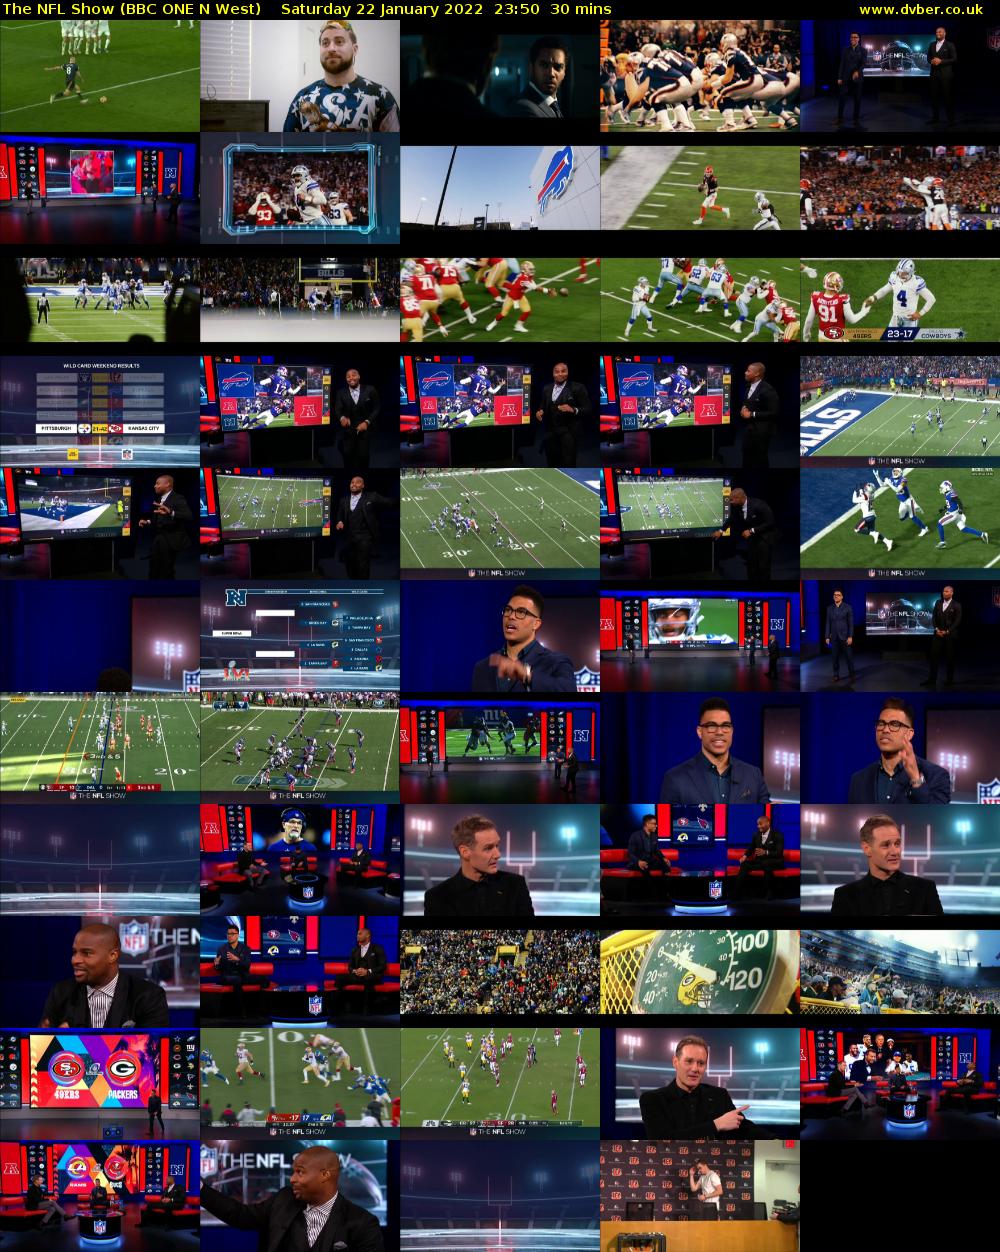 The NFL Show (BBC ONE N West) Saturday 22 January 2022 23:50 - 00:20